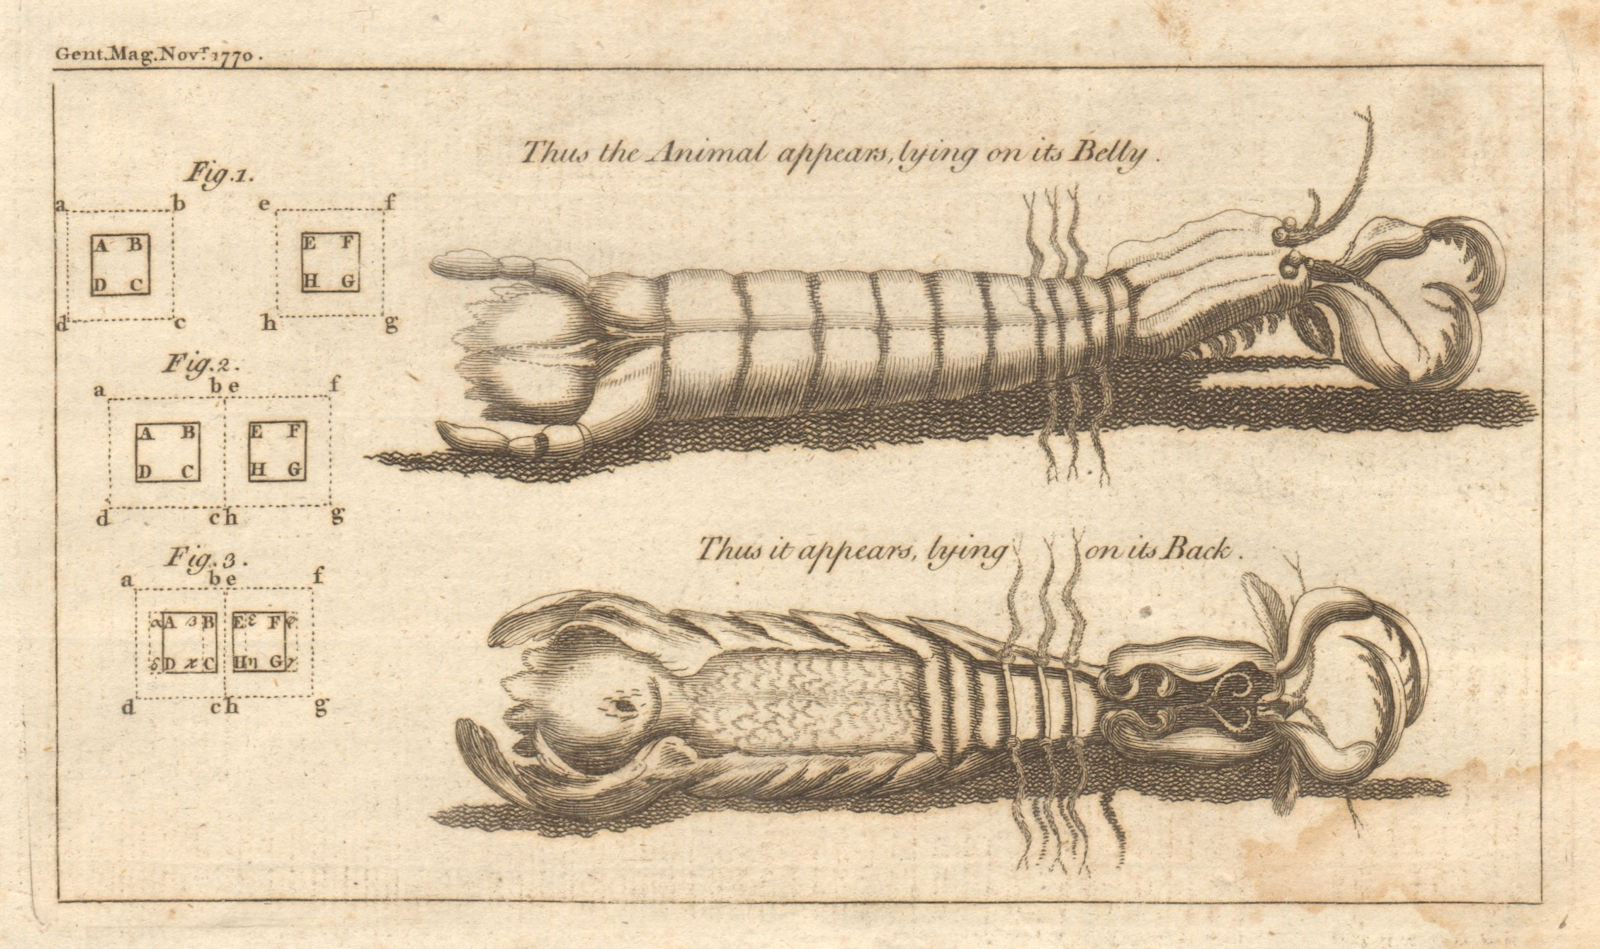 Associate Product Shell fish crayfish lobster. Causes of attraction & repulsion. Crustaceans 1770